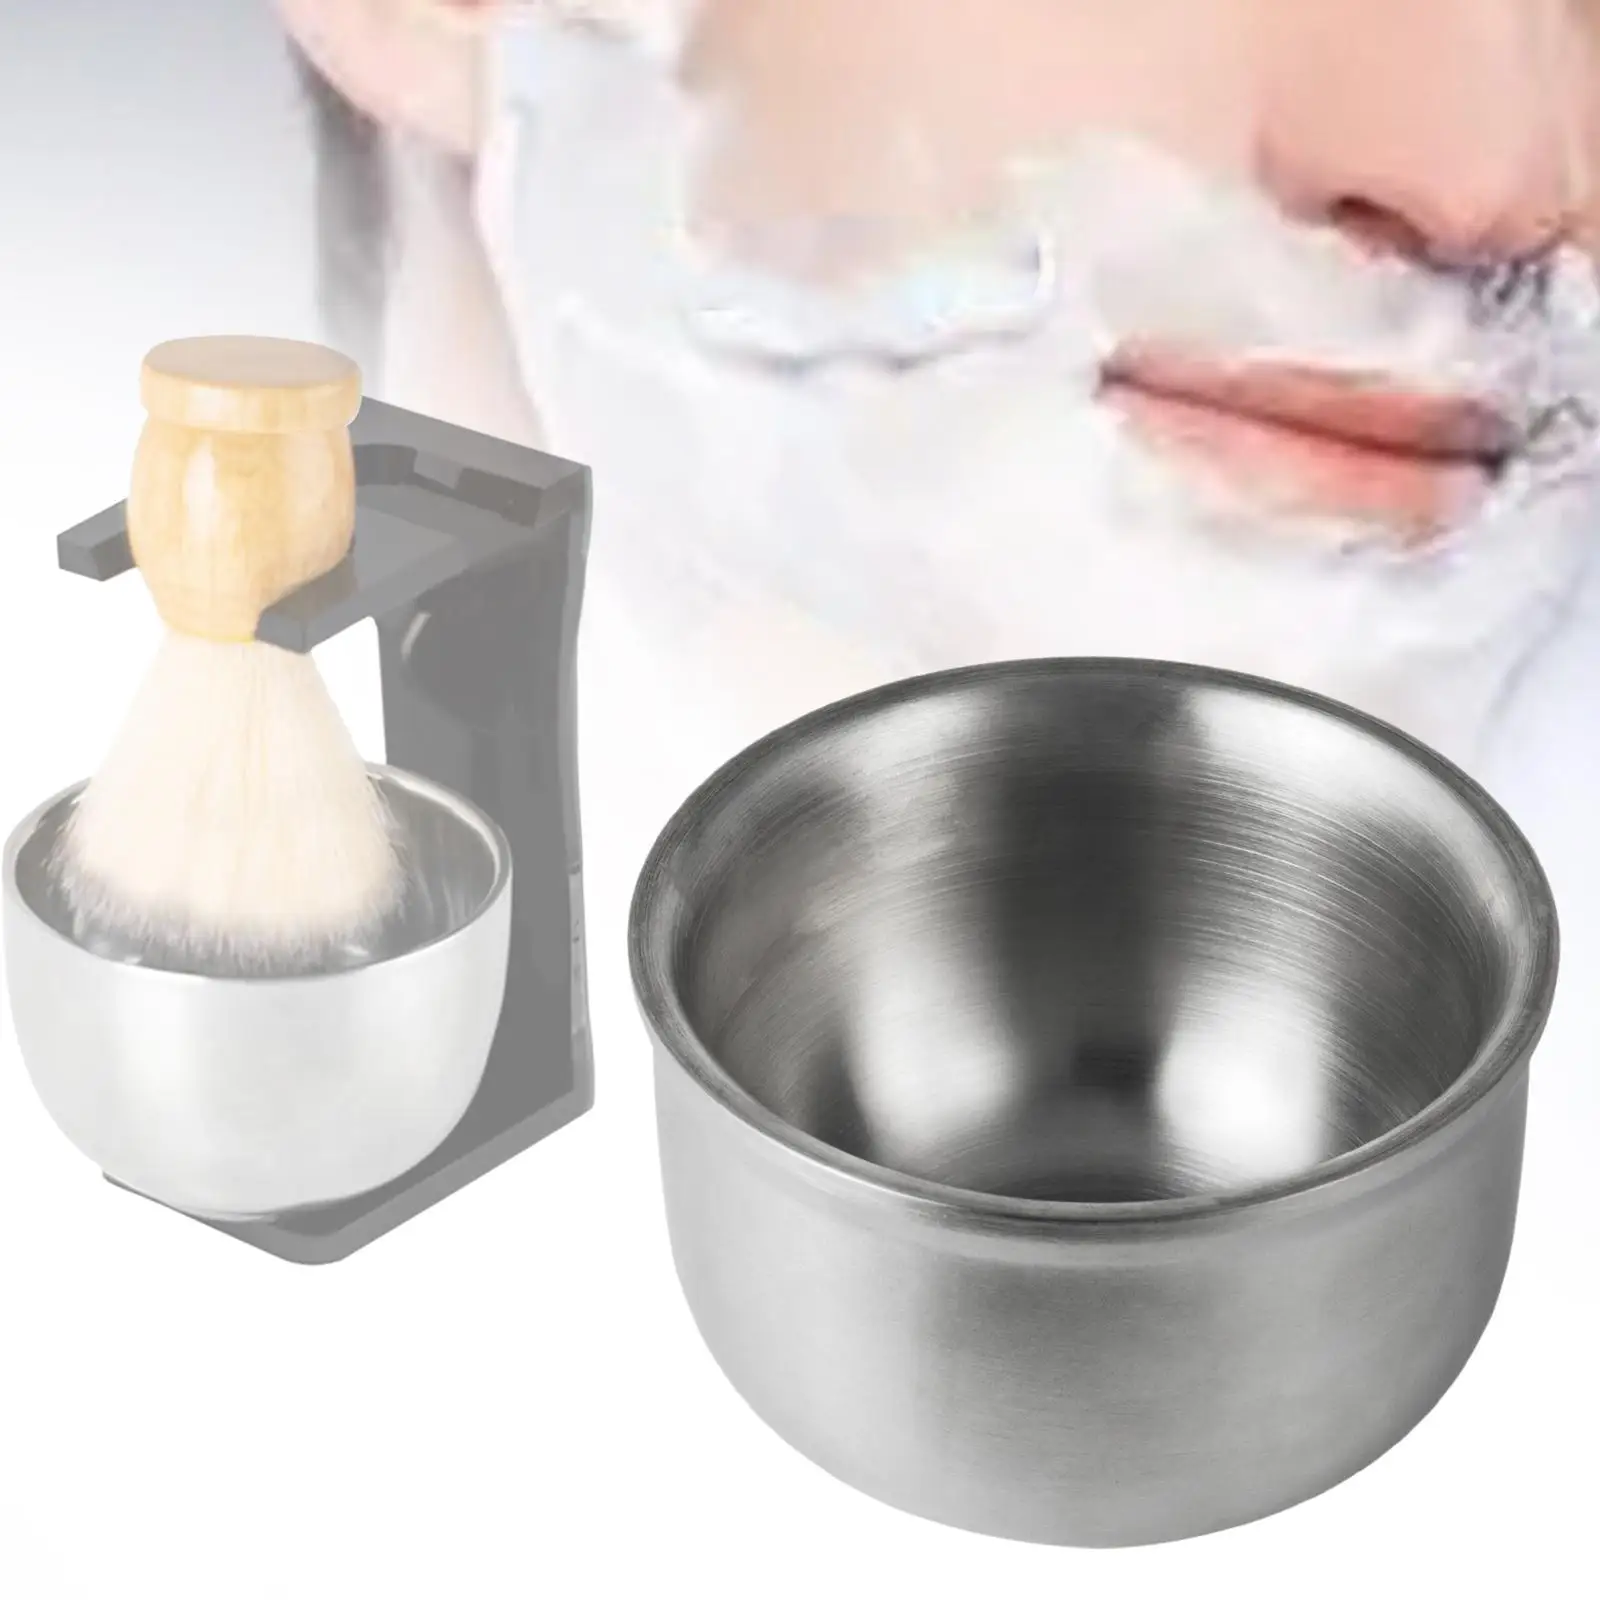 Shaving Soap Bowl Produce Rich Foam Fits Wet Shaving Keep Warm Better Smooth Shaving Cup Shave Soap Cup Shaving Mug for Gift Men